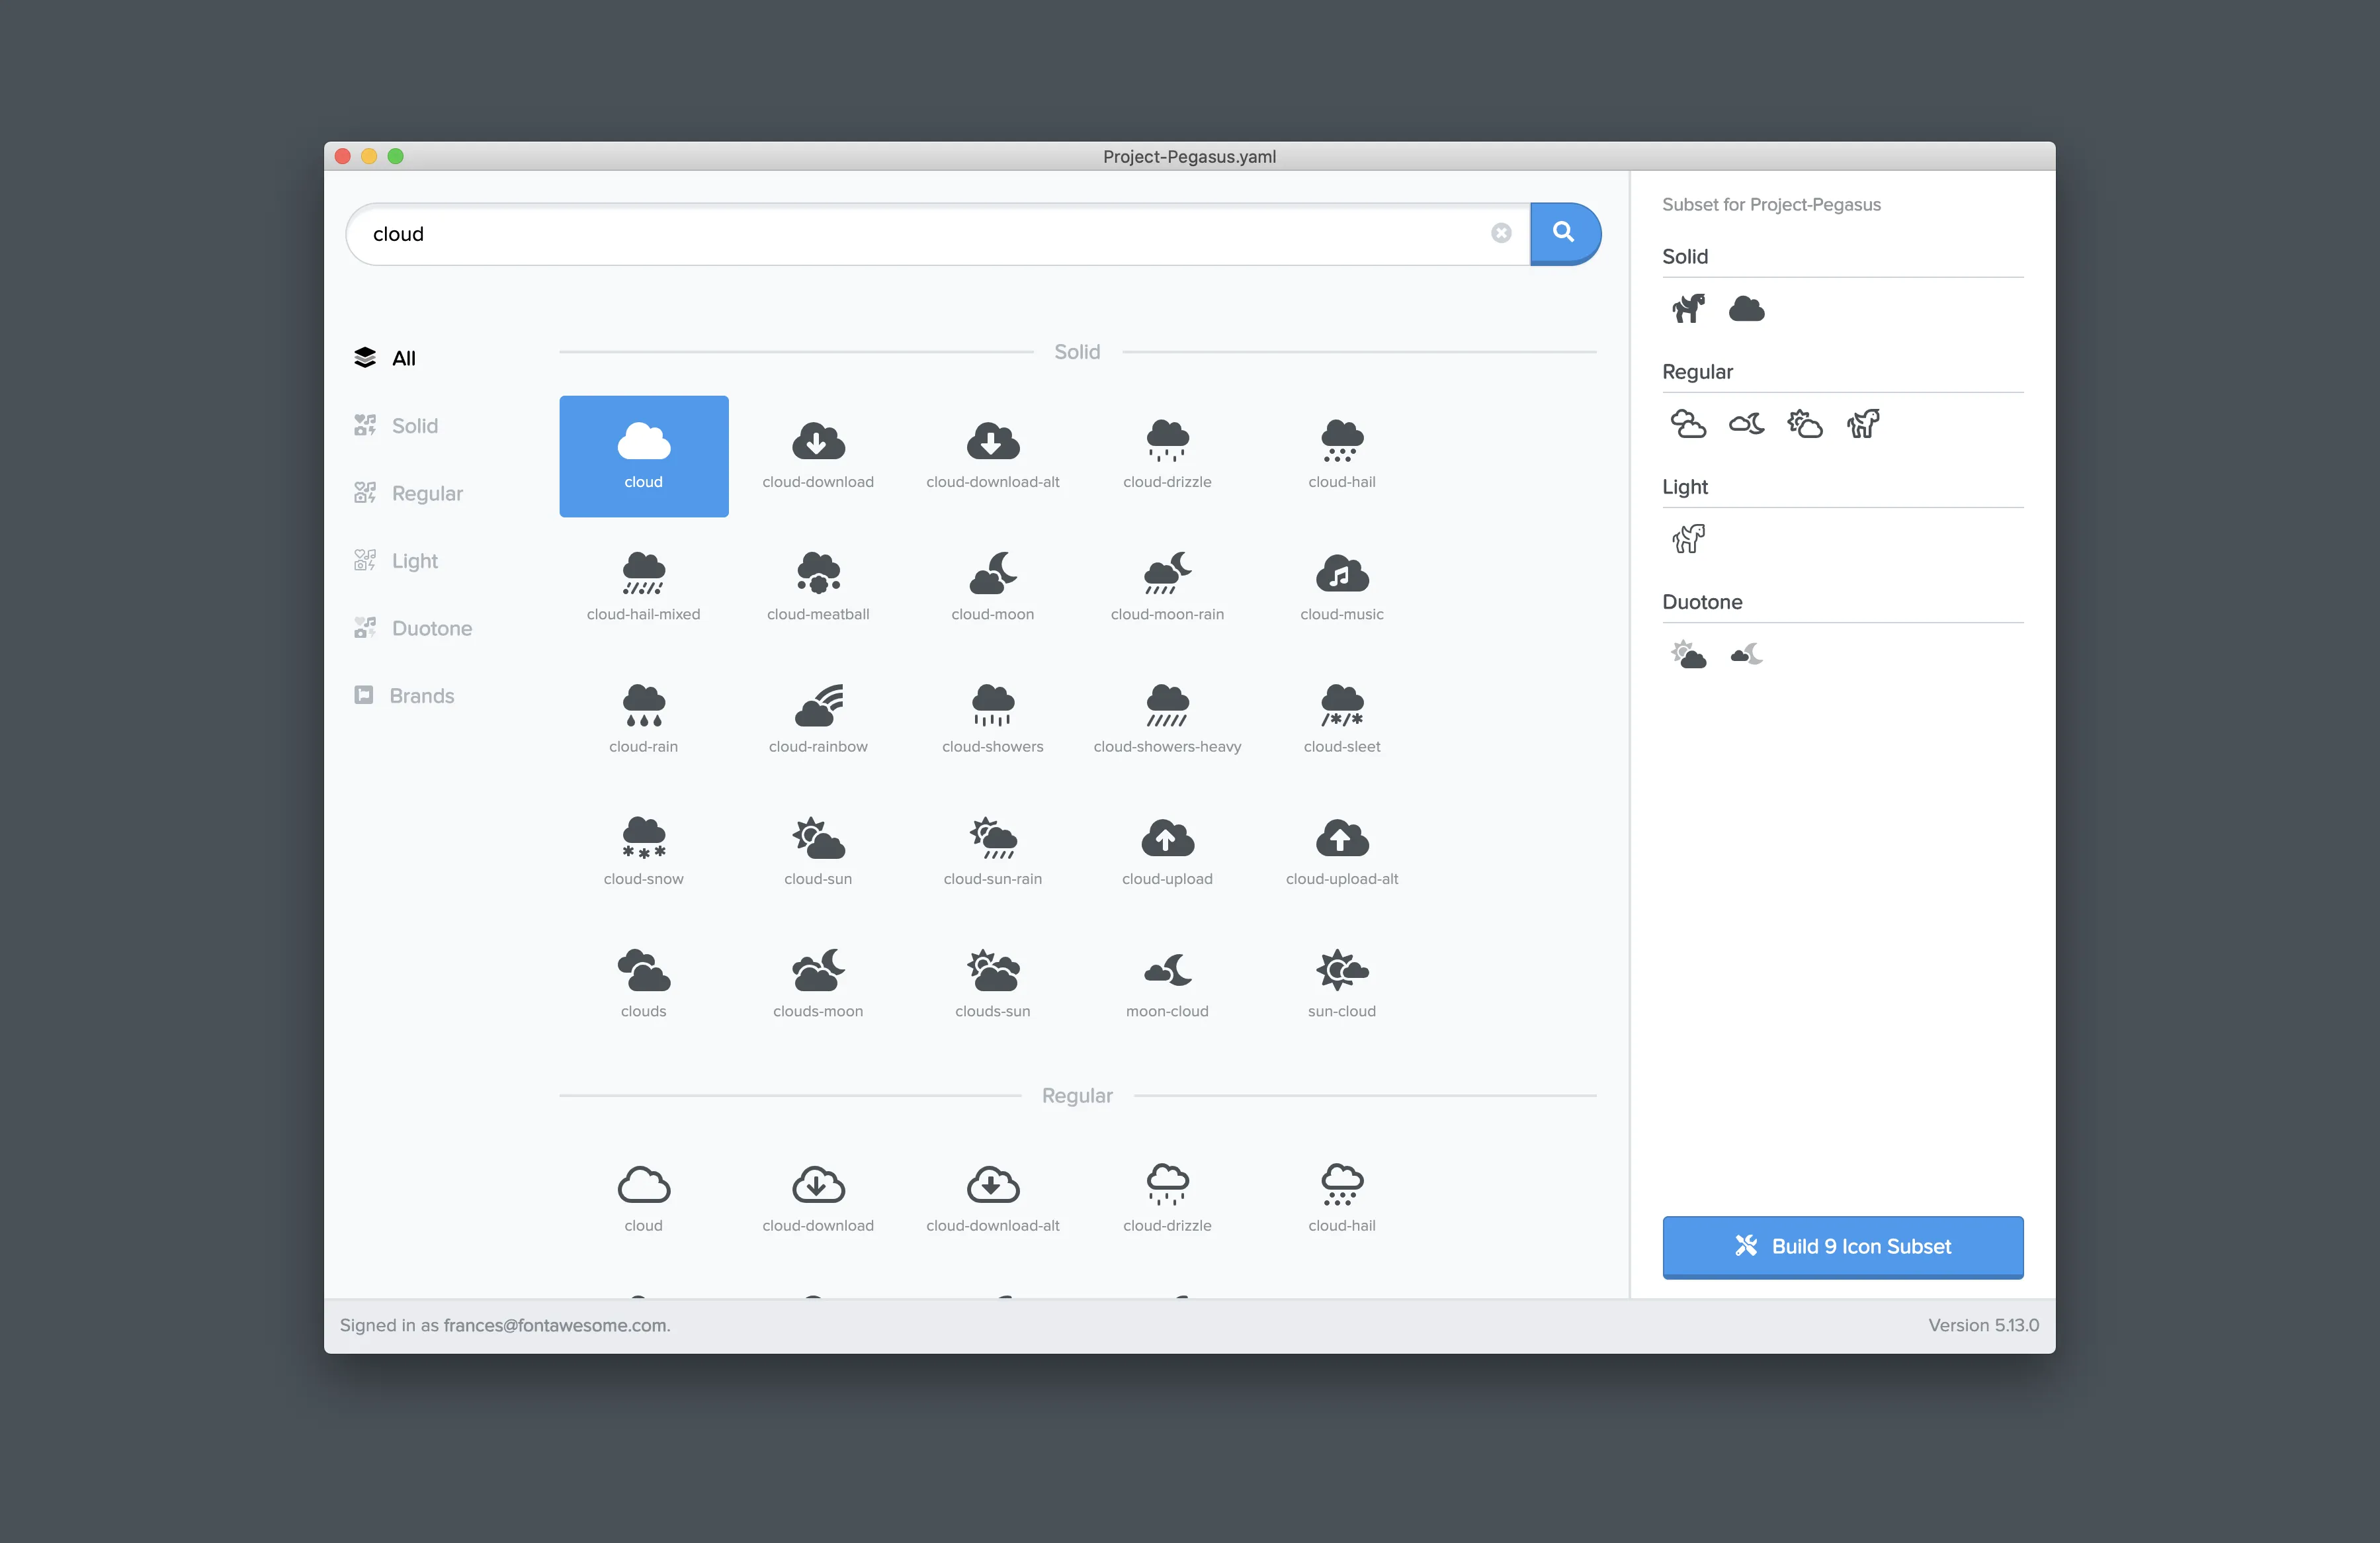 A cloud icon is selected to be included in the subset.